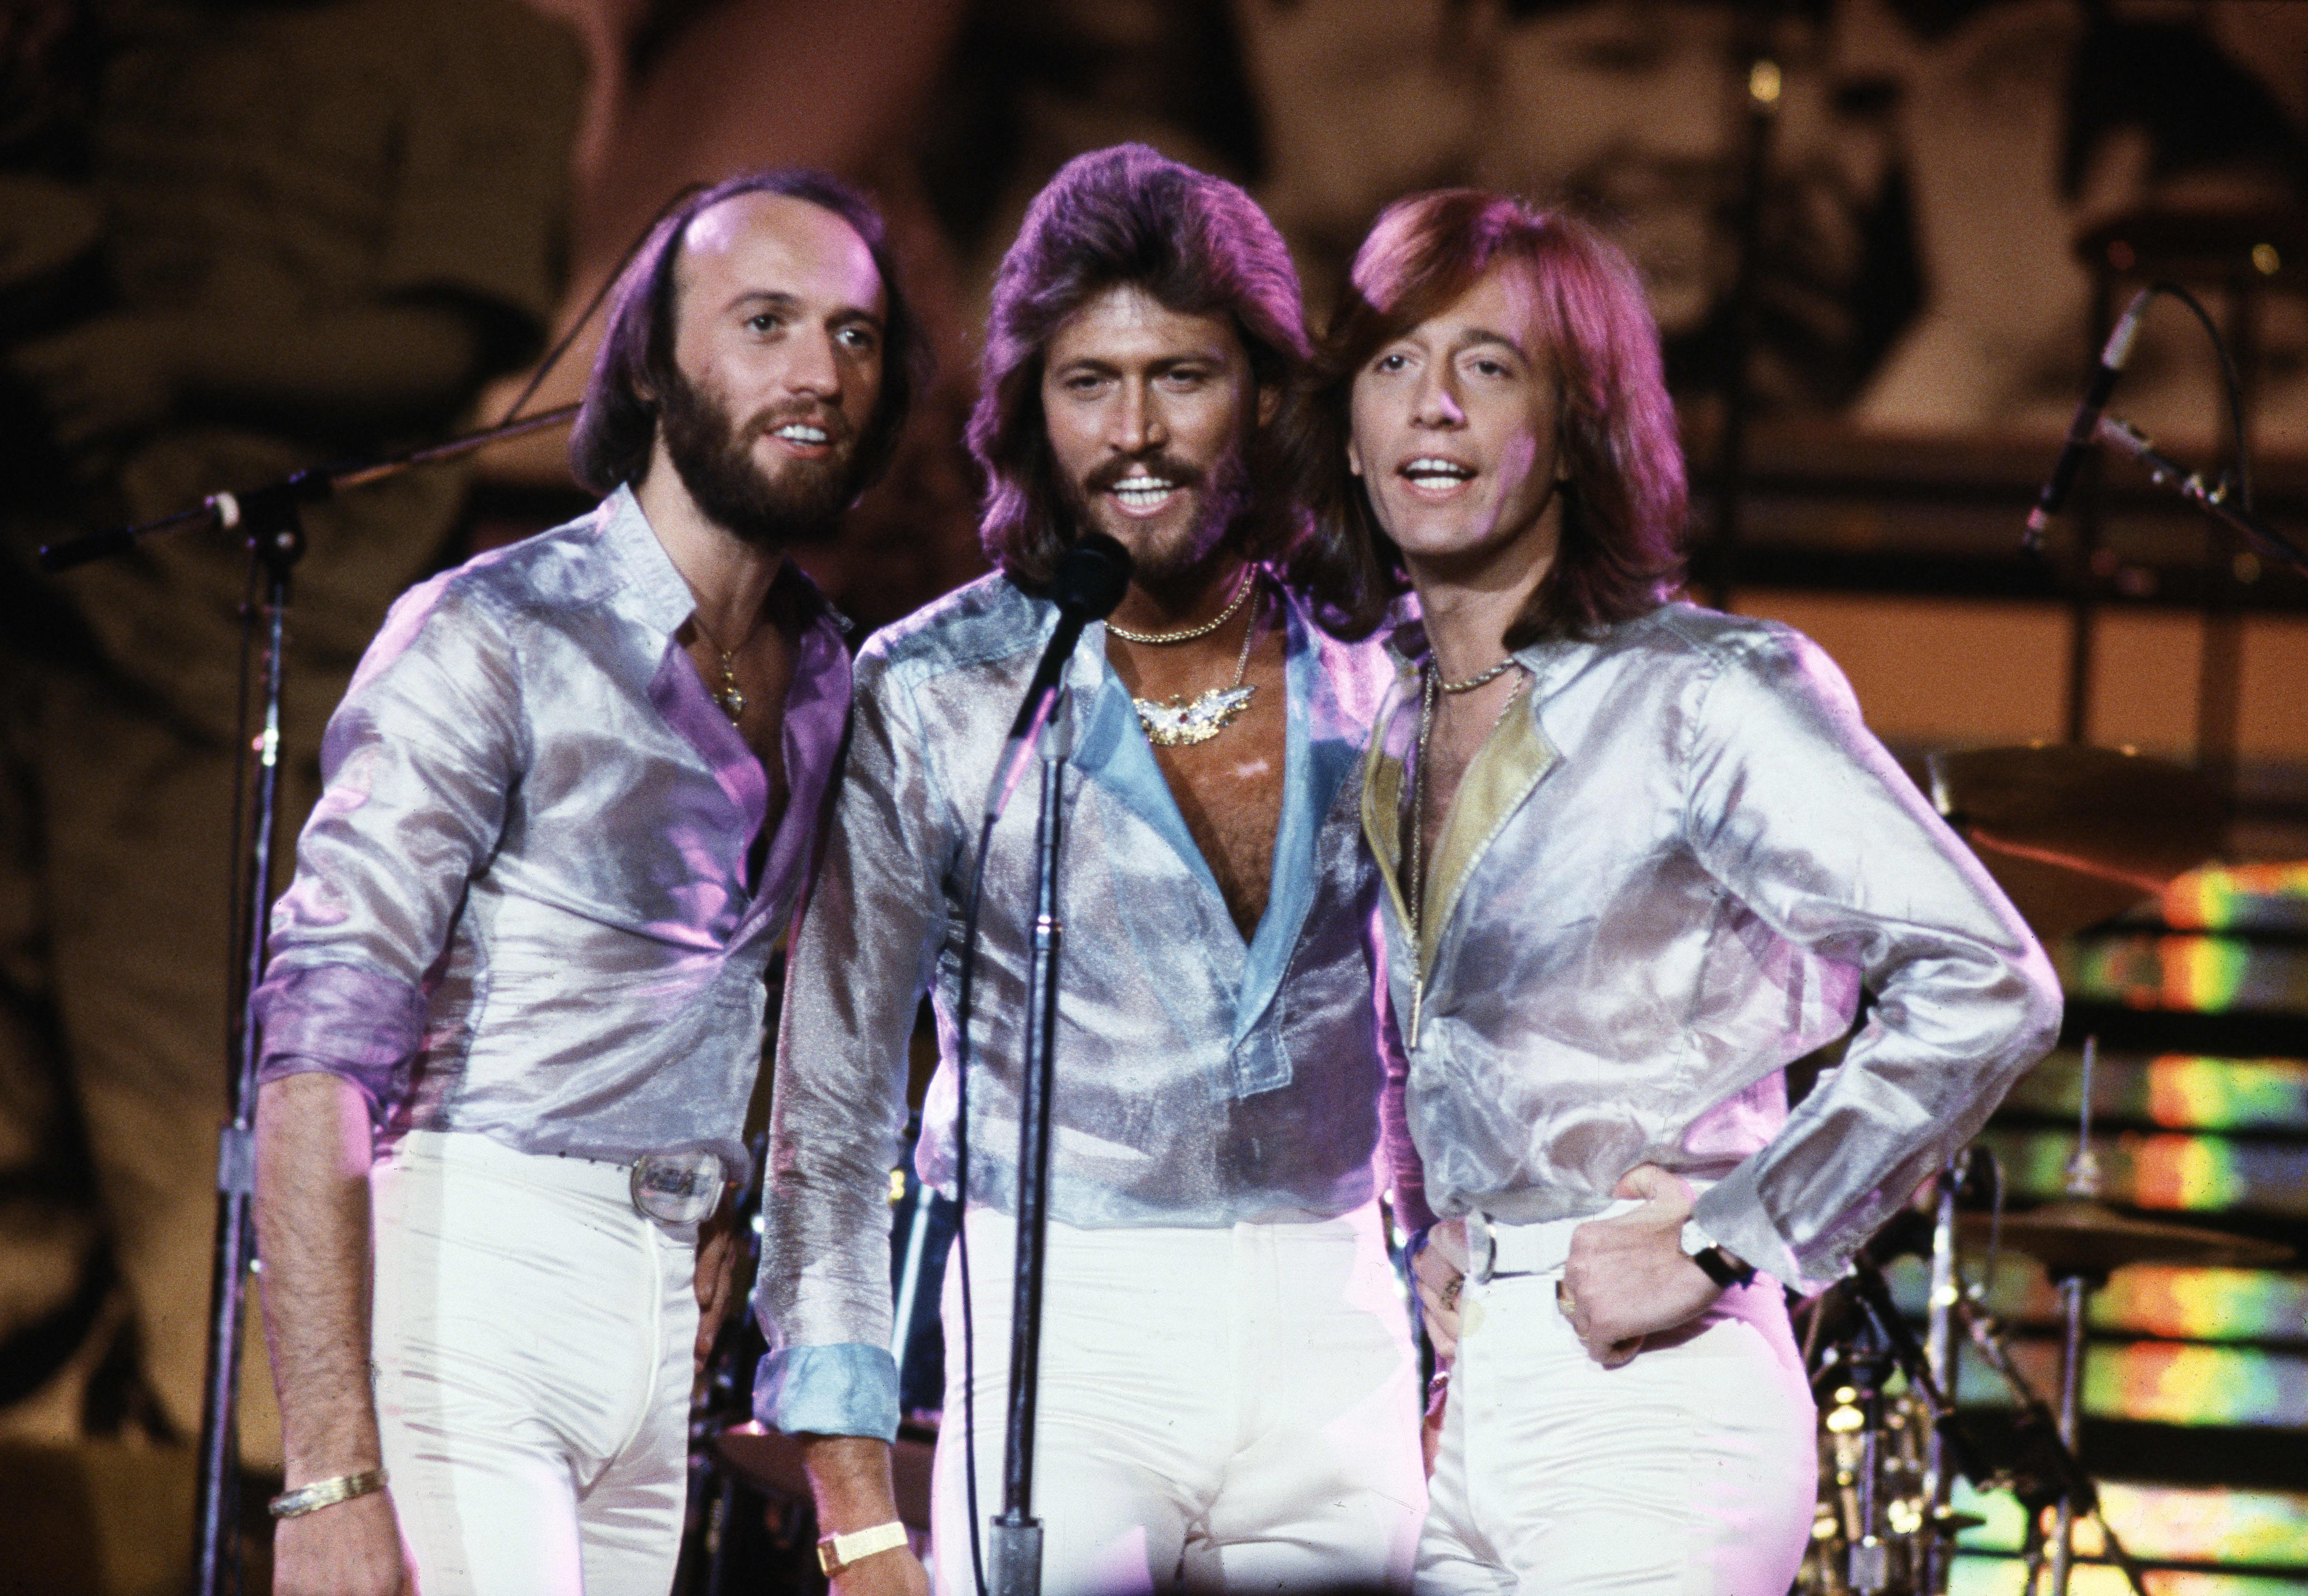 Bee Gees Chart History